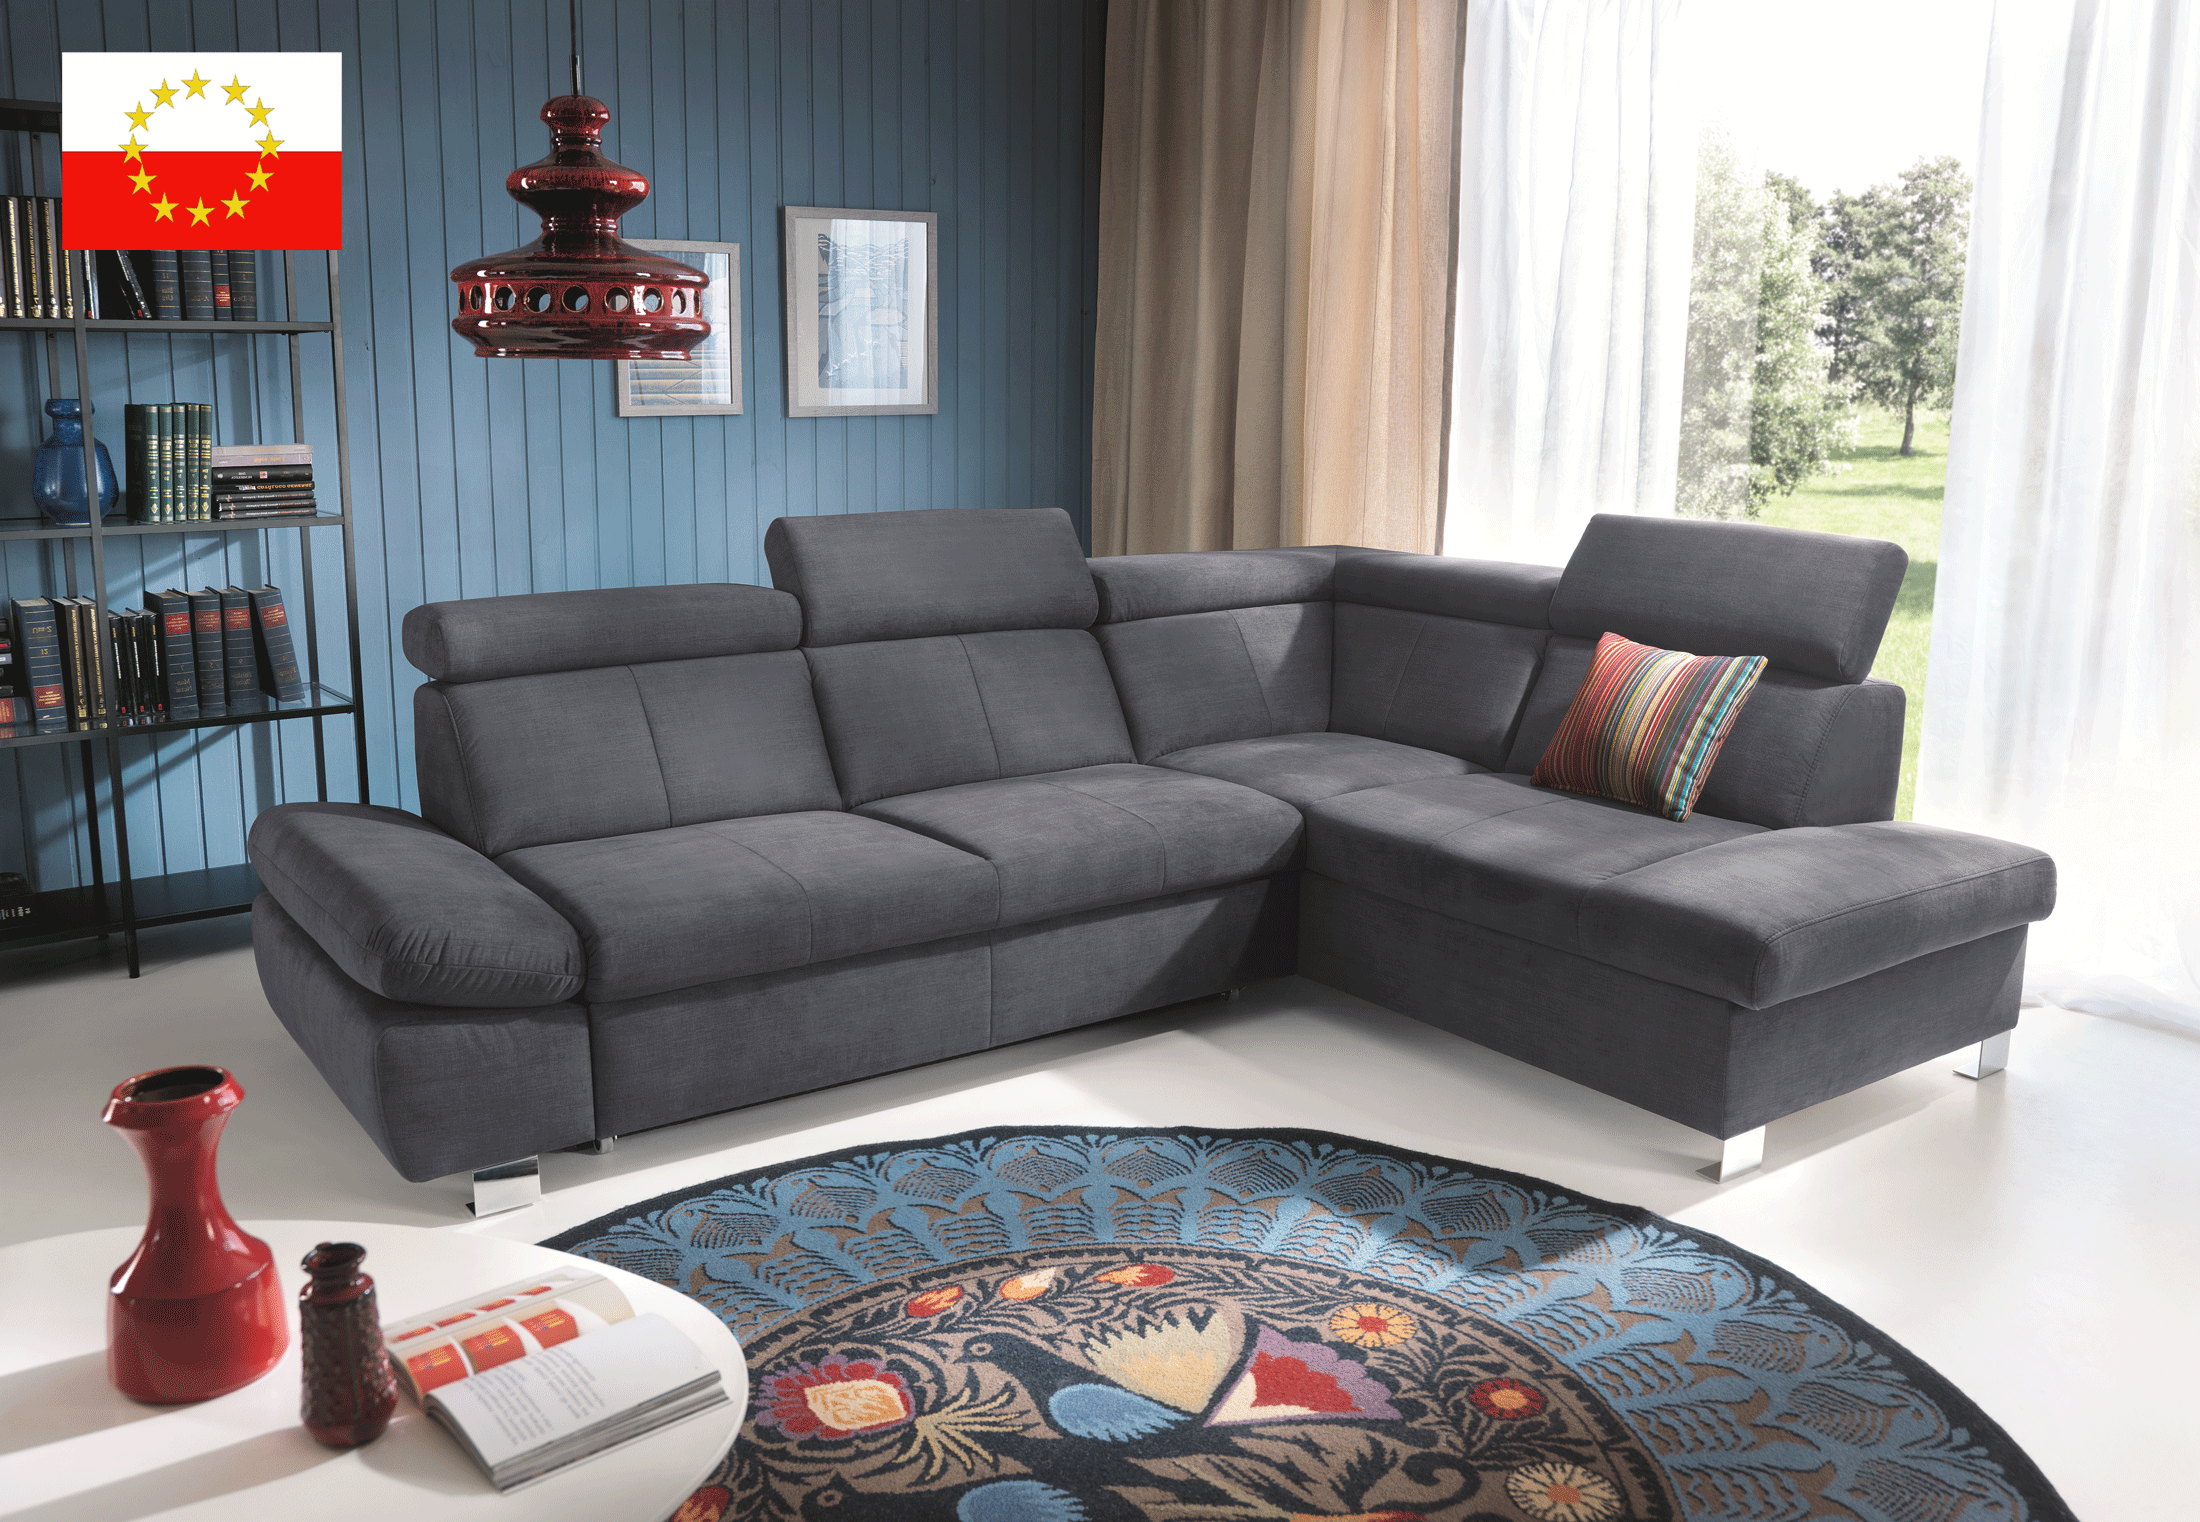 Living Room Furniture Sleepers Sofas Loveseats and Chairs Happy Sectional w/Bed & Storage